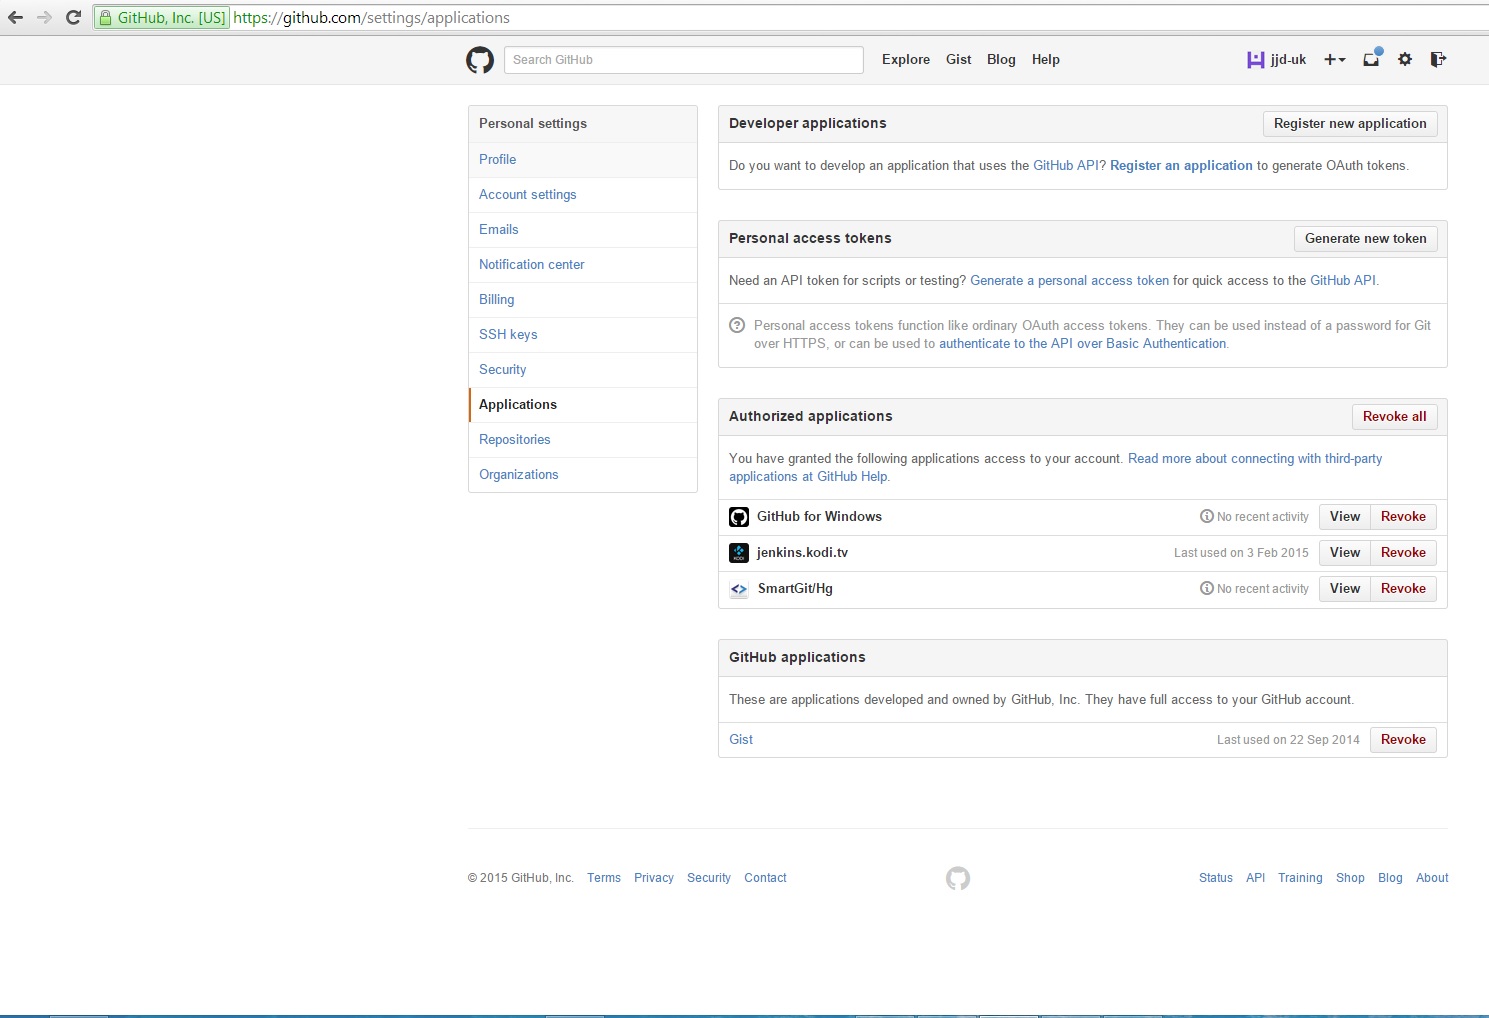 Step 5: Go to your Github "Personal settings" and "Applications" and you should see an entry for "jenkins.kodi.tv"